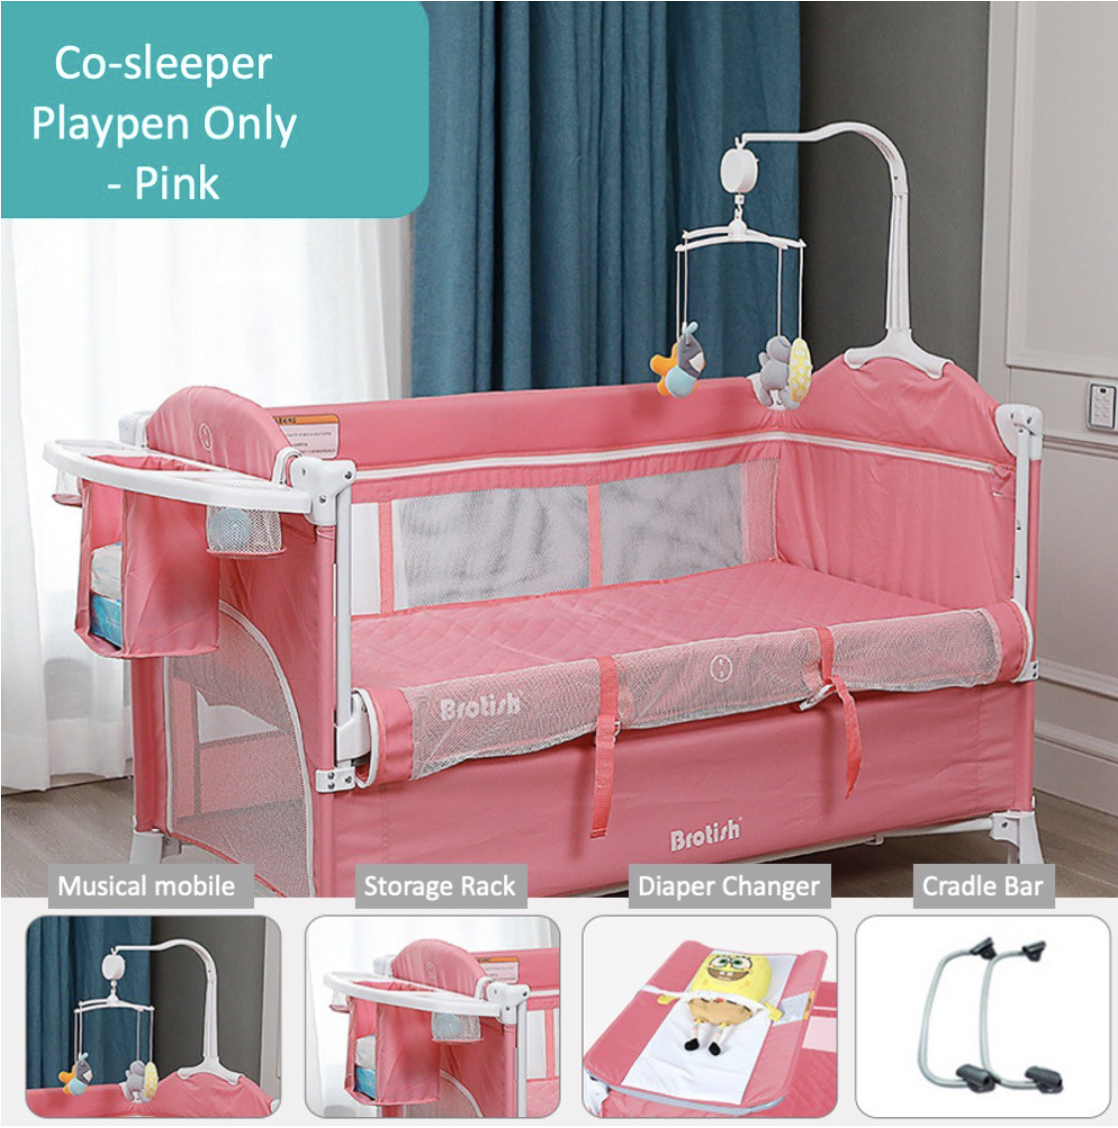 Red Castle Cocoonababy - Travel cots & beds - Cots, night-time